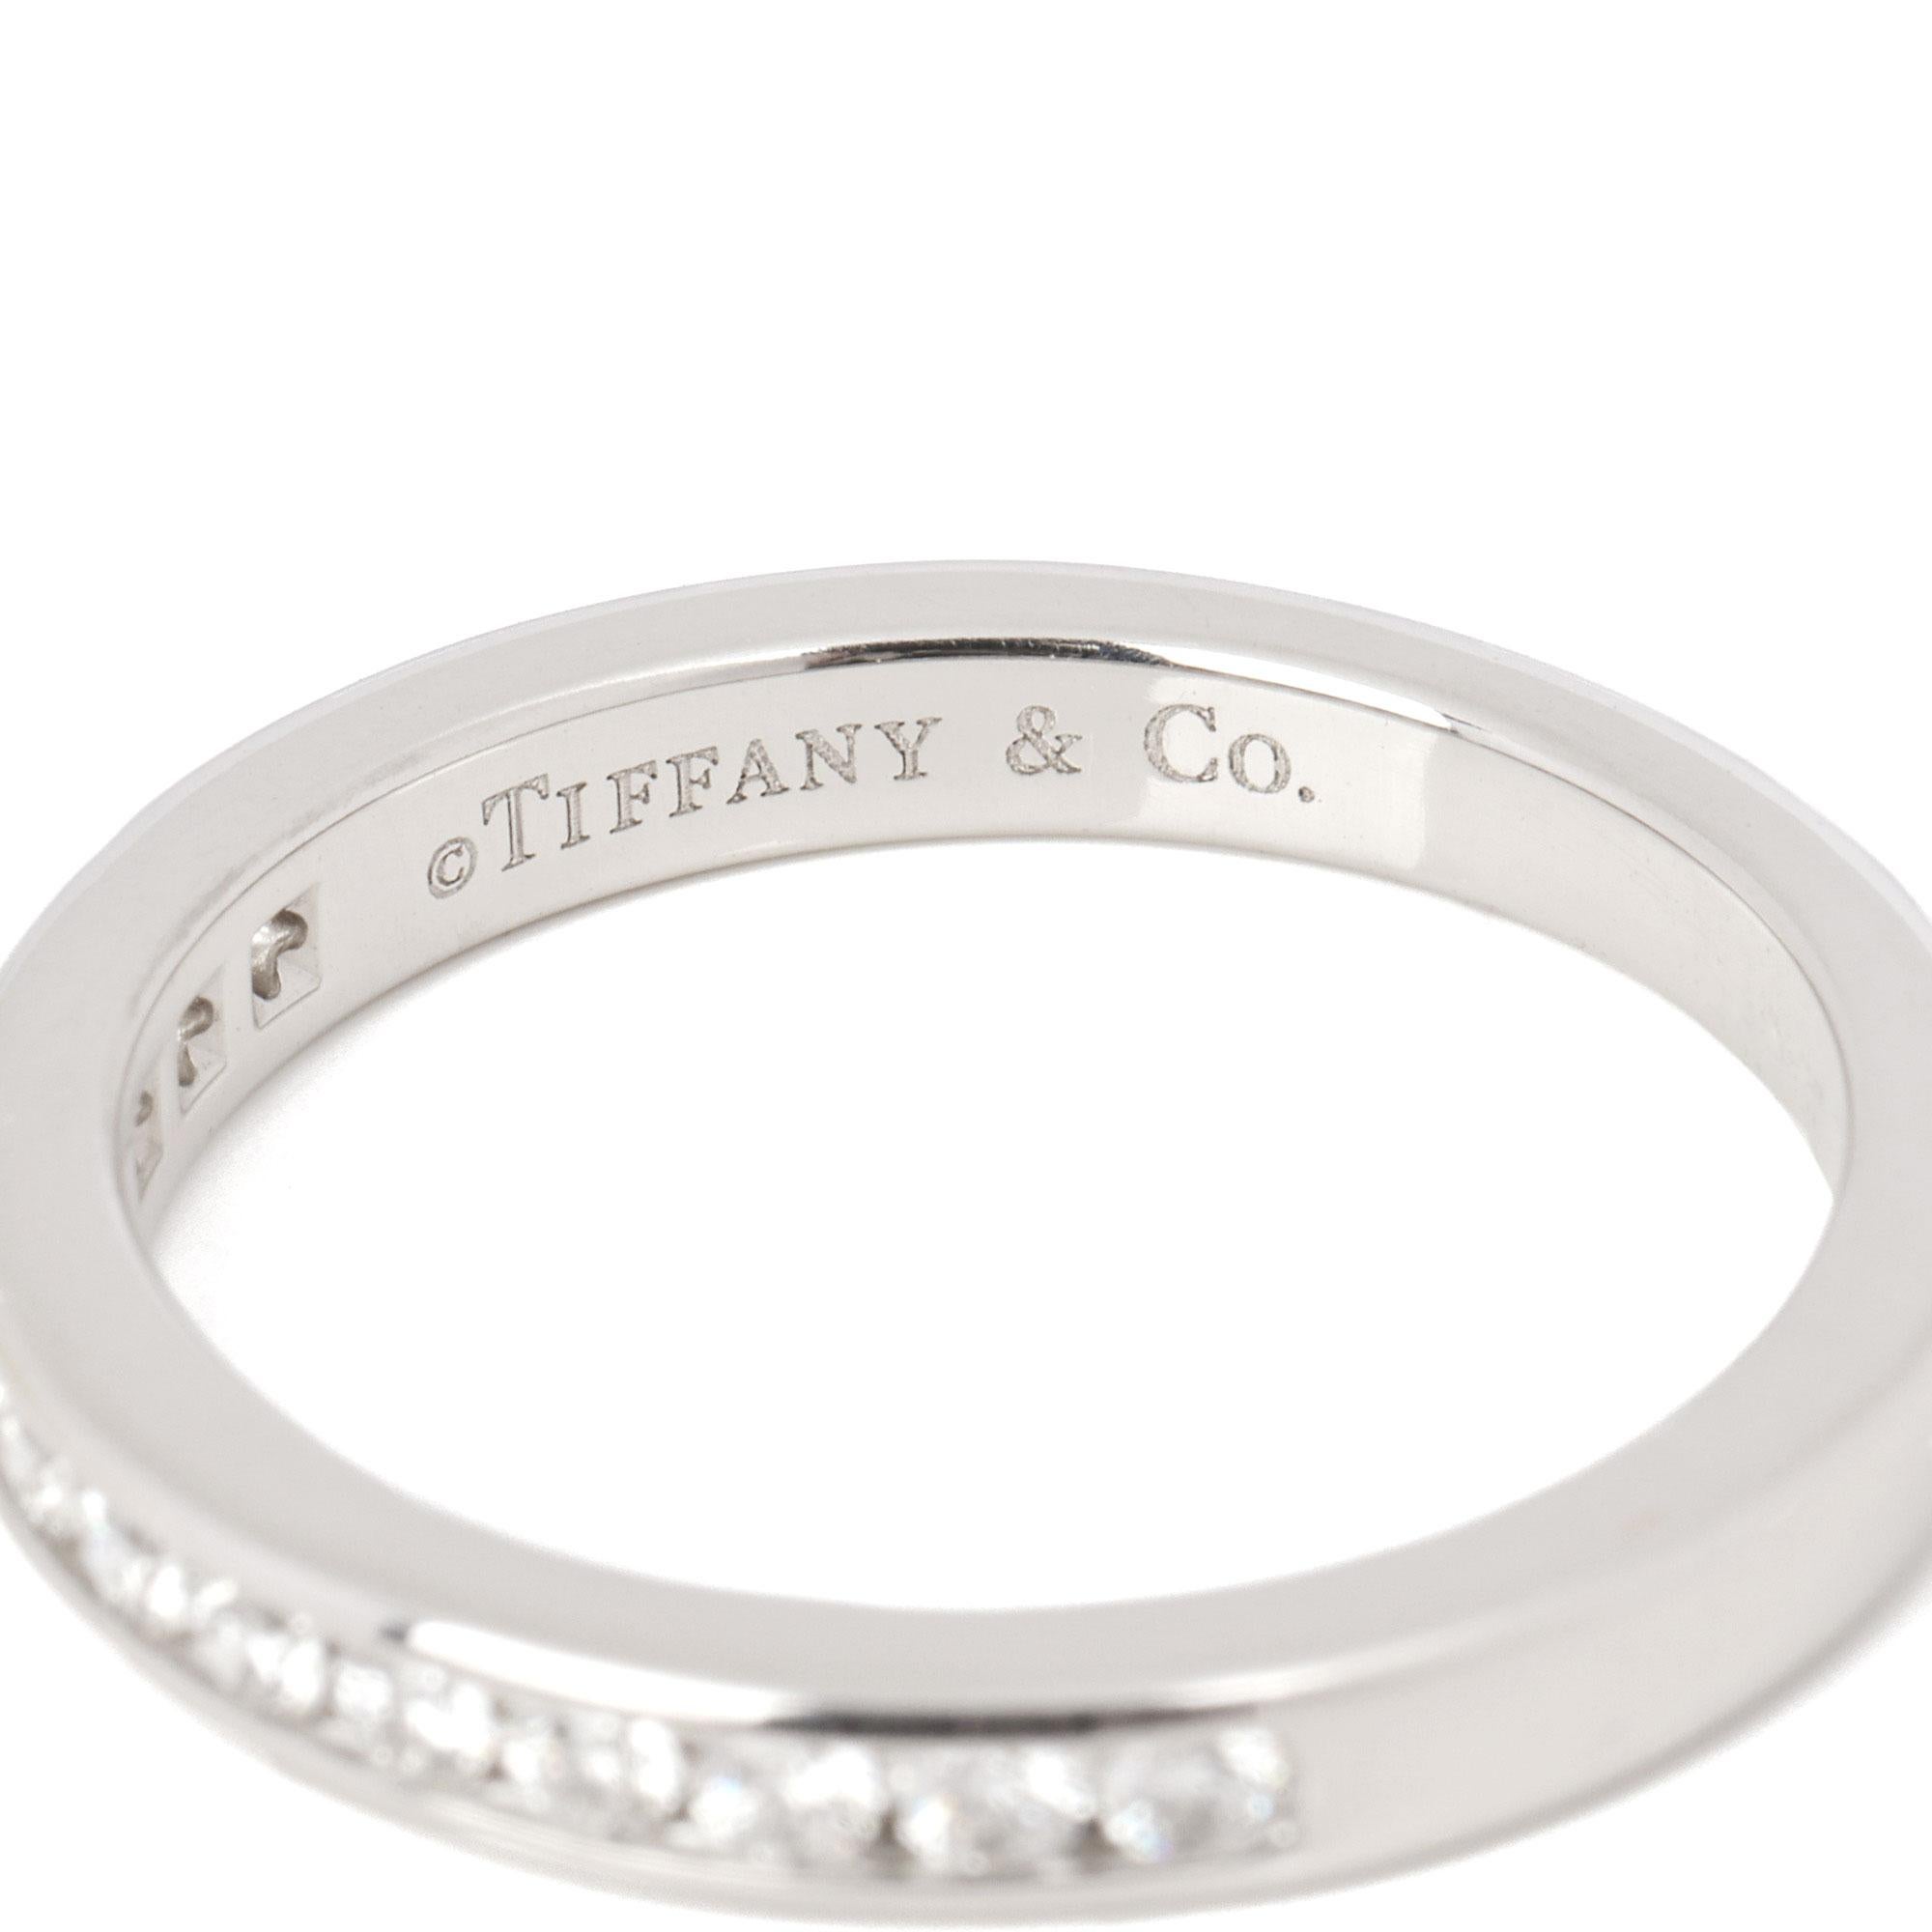 This ring by Tiffany & Co. features round brilliant cut diamonds in a half eternity design. 
RRP	£2,575
ITEM CONDITION	Excellent
MANUFACTURER	Tiffany & Co
GENDER	Women's
UK RING SIZE	H
EU RING SIZE	46
US RING SIZE	3.75
BAND WIDTH	2.5mm
TOTAL